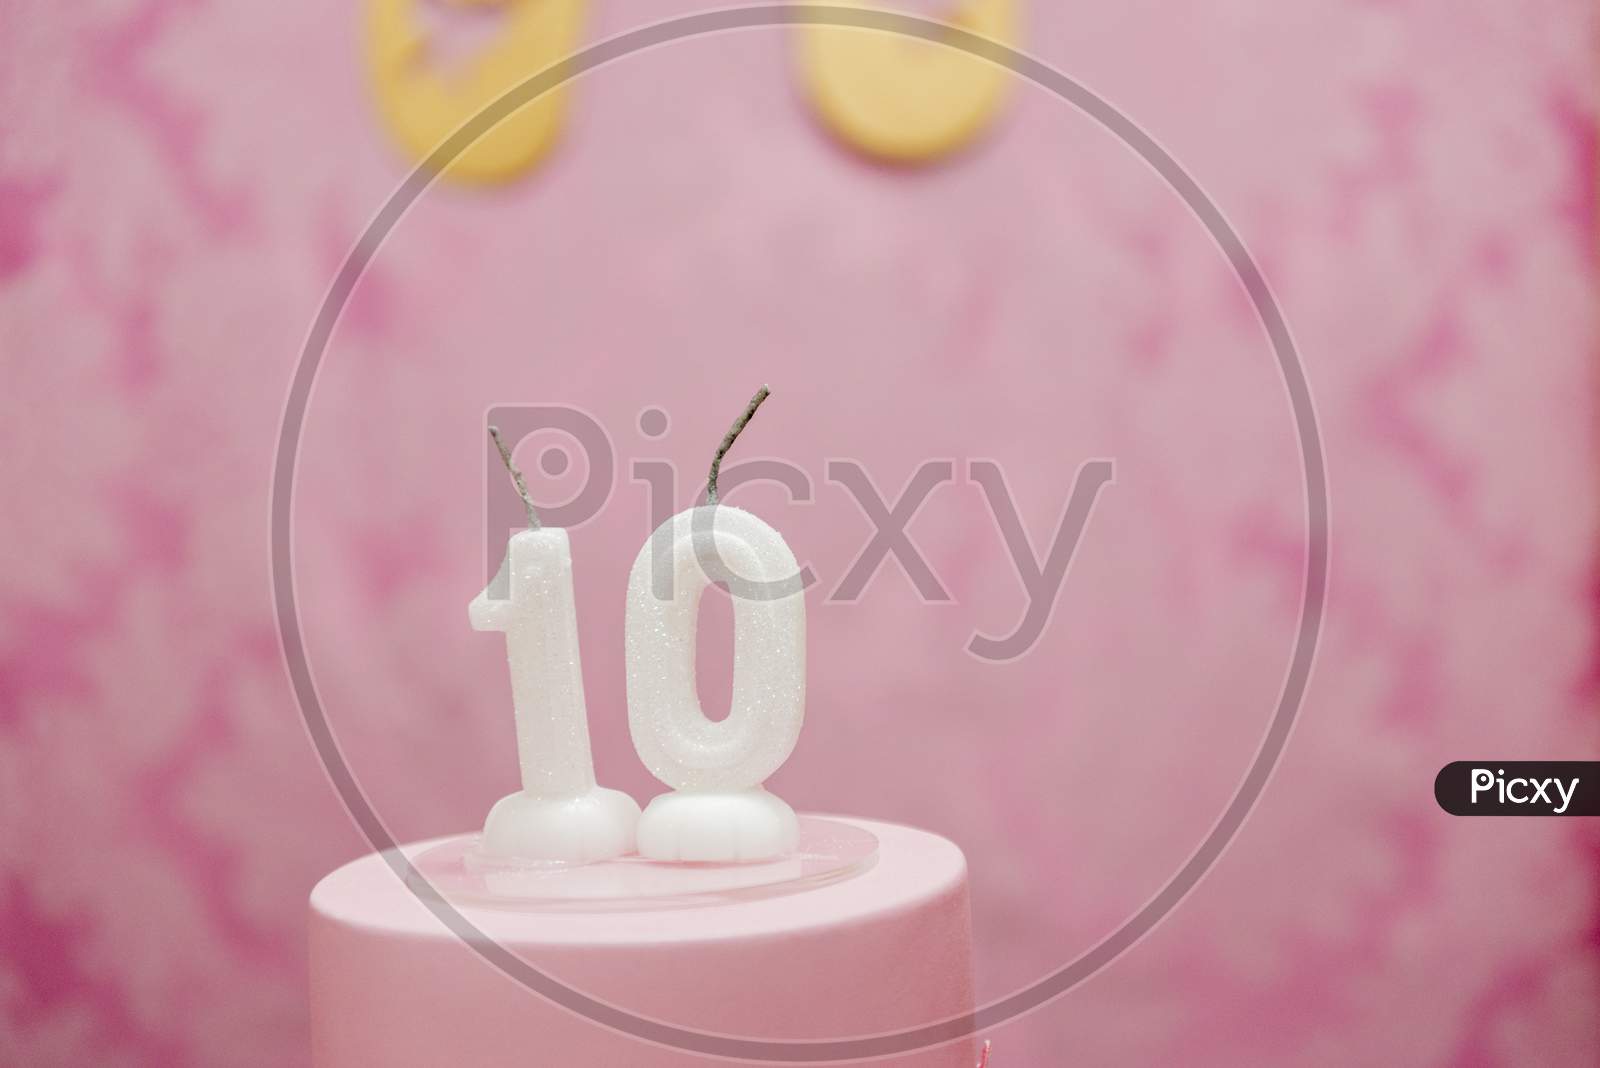 Birthday Cake With Candles As Number Ten On Pink Arabesques Background.